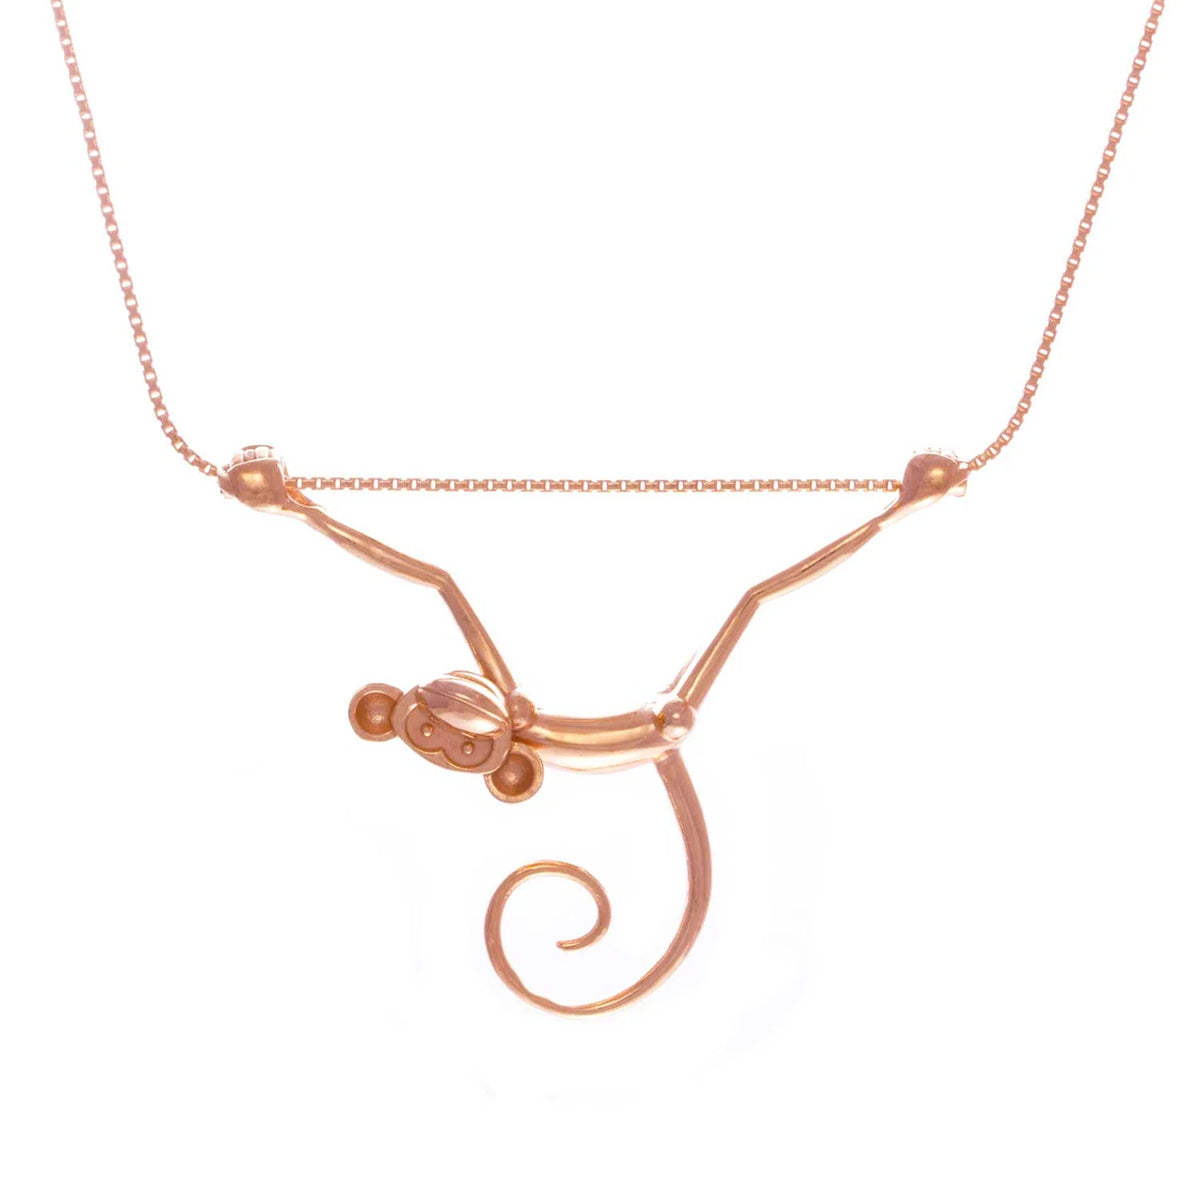 Lee Renee Silver / Rose Gold Toy Monkey Necklace